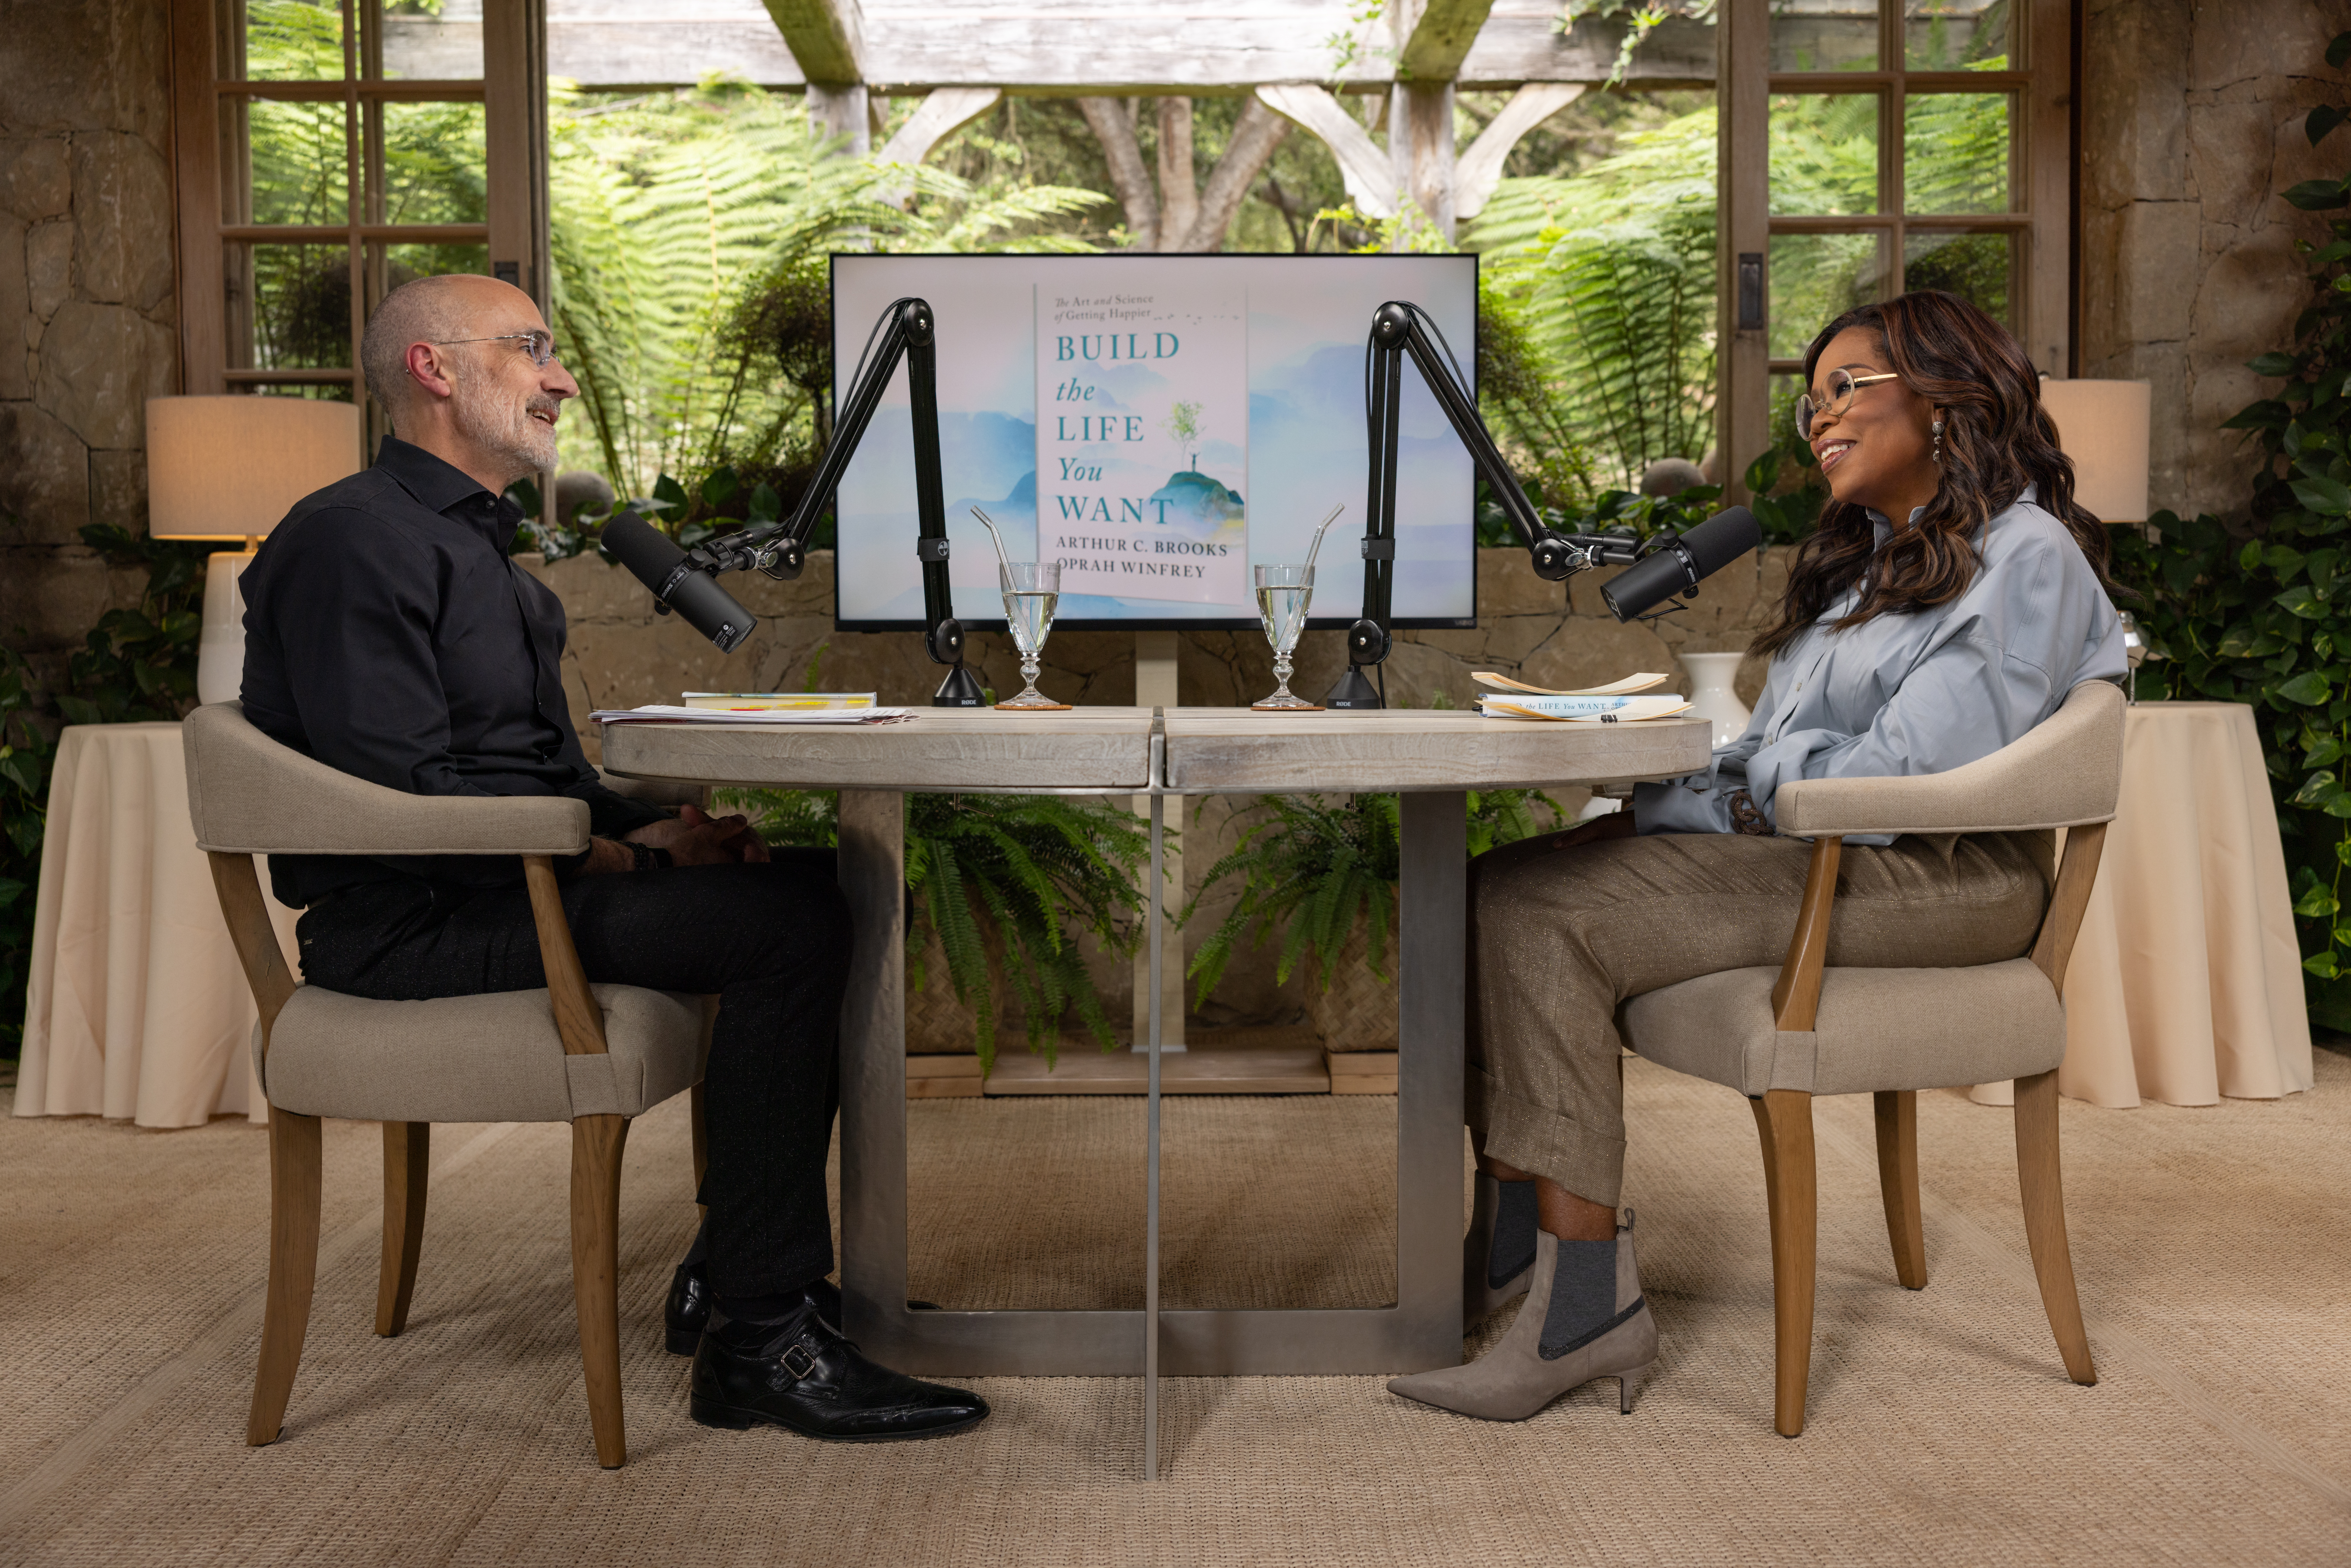 Oprah's Super Soul Podcasts: Build the Life You Want Episode 1